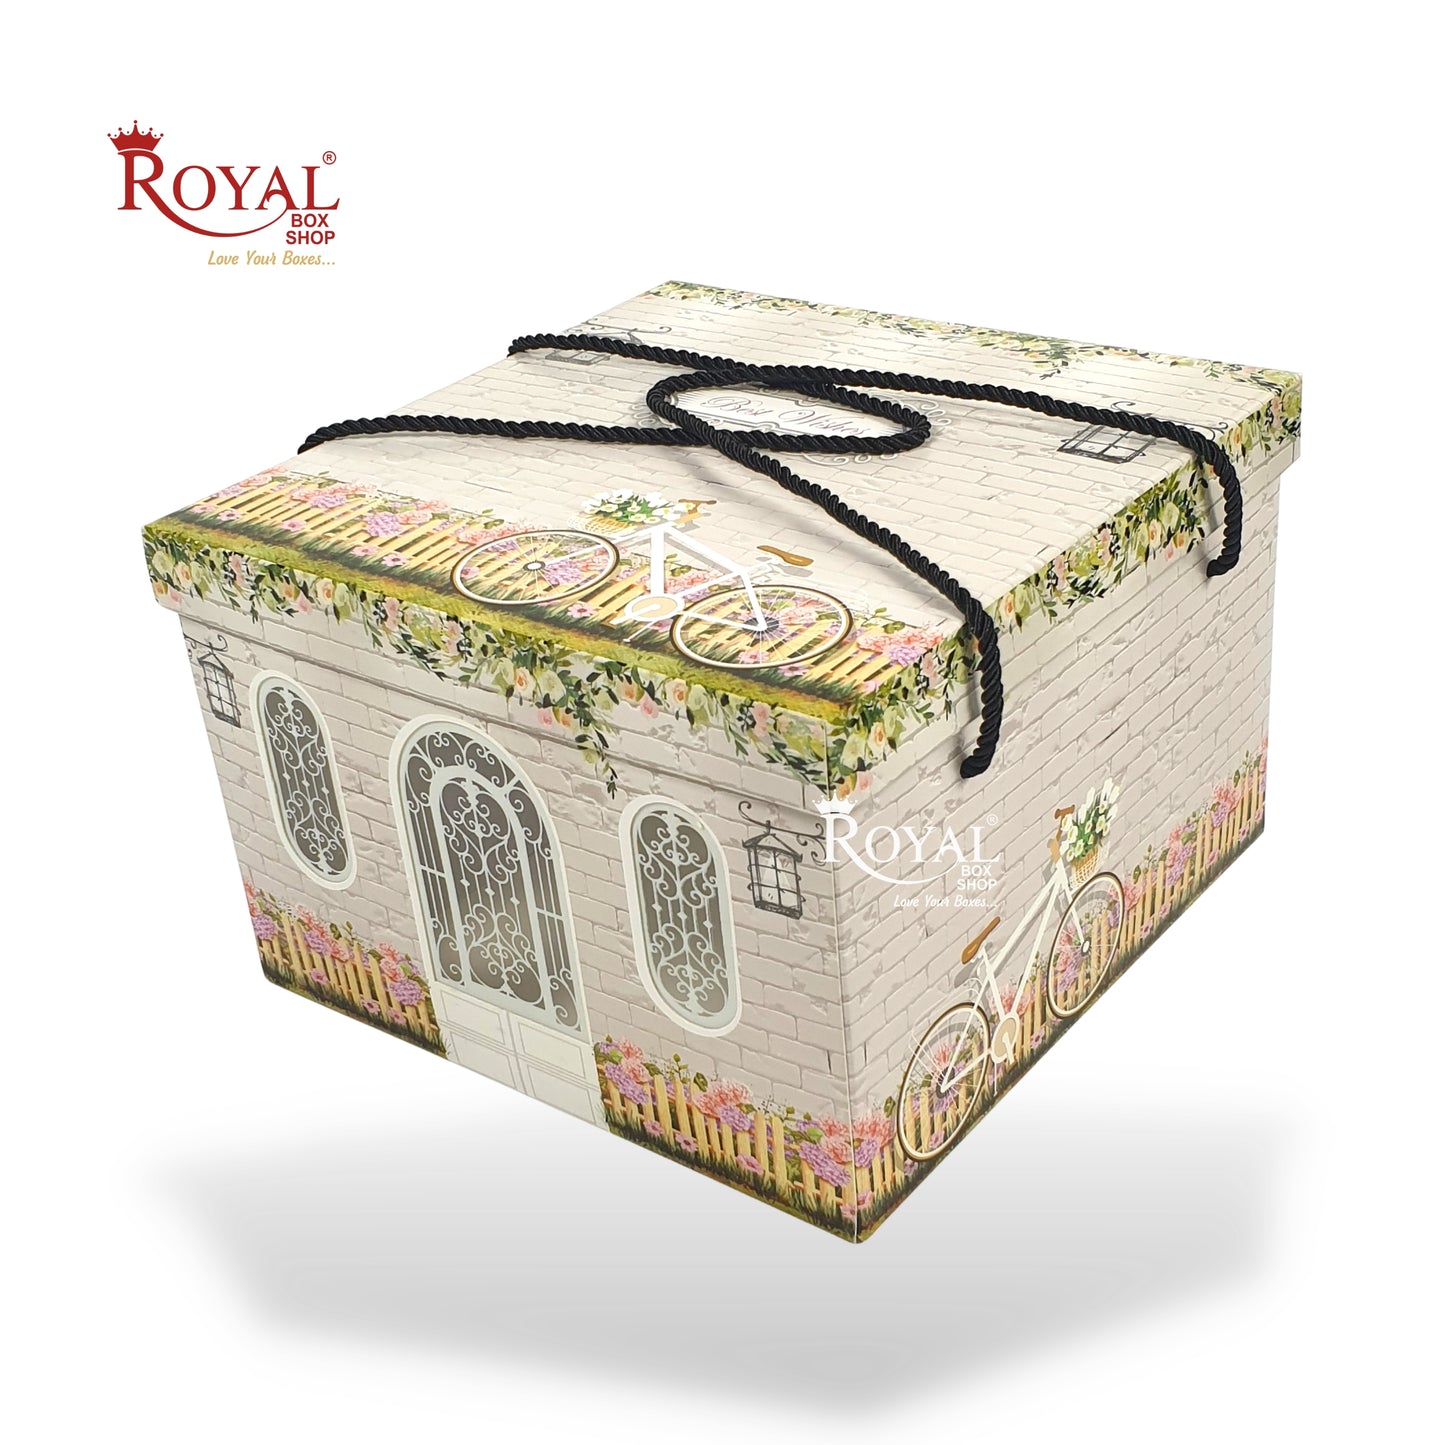 Cottage Theme Hamper Gift Box | Grey | 9x9x6 Inch I Perfect for Wedding Gifts, Room Hampers, Special Occasions & More